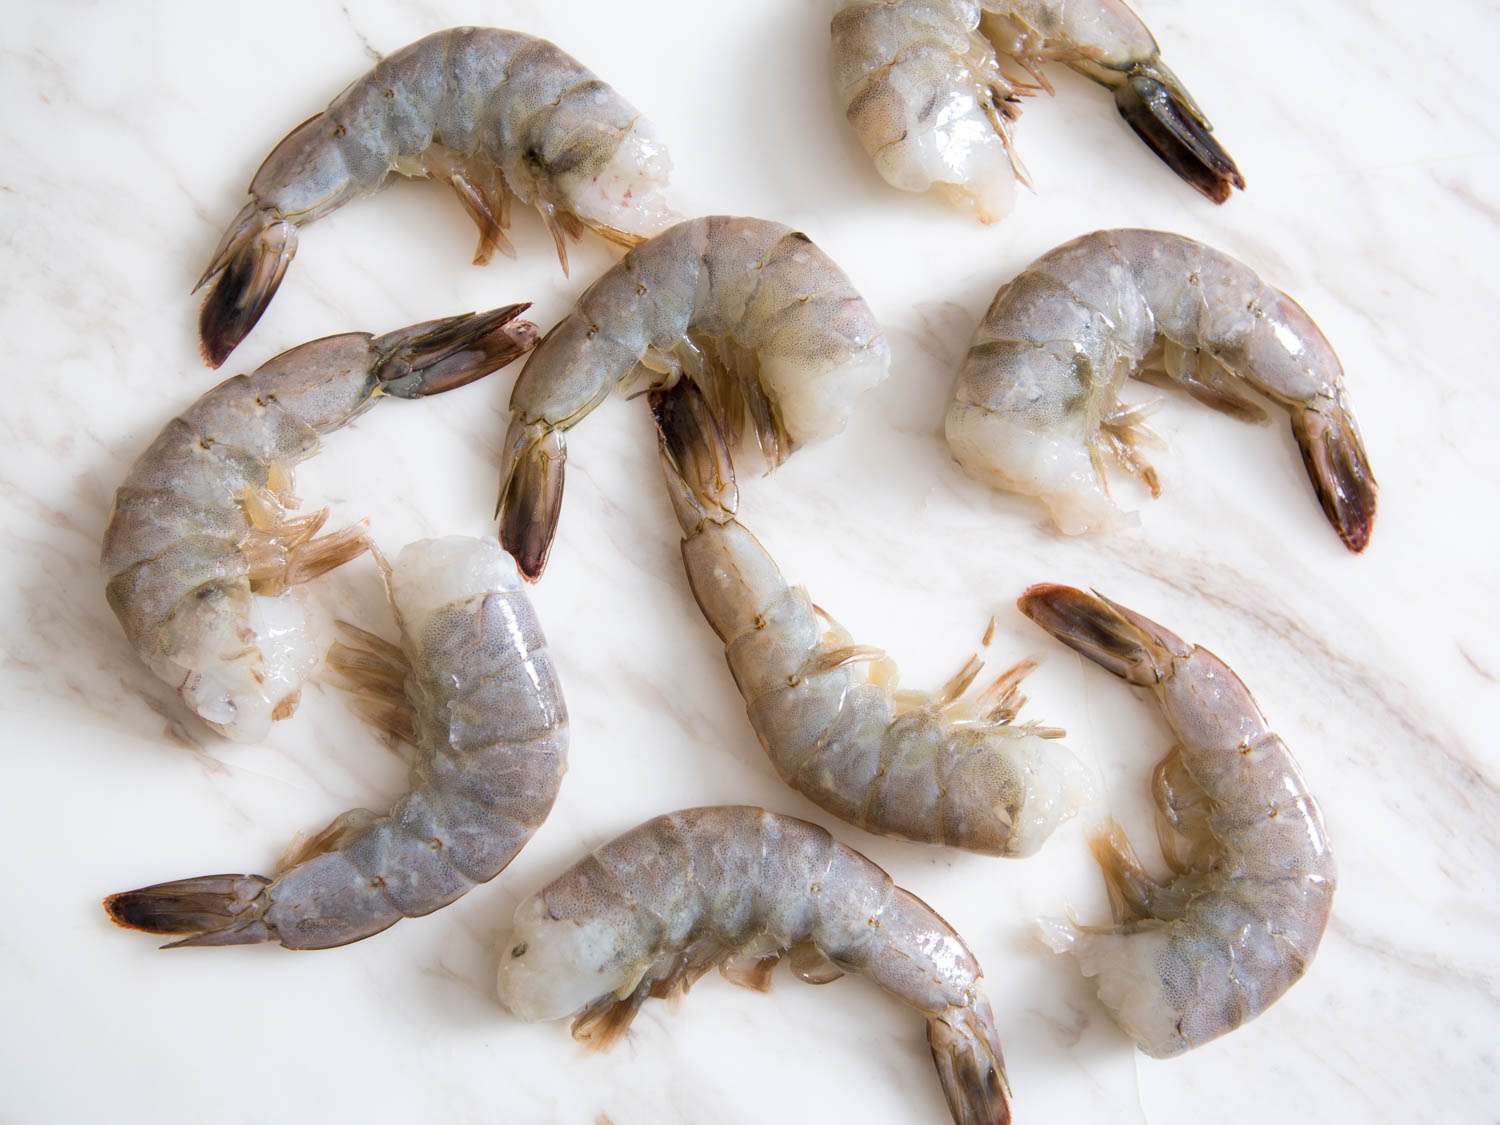 How do you tell if shrimp has gone bad in the freezer